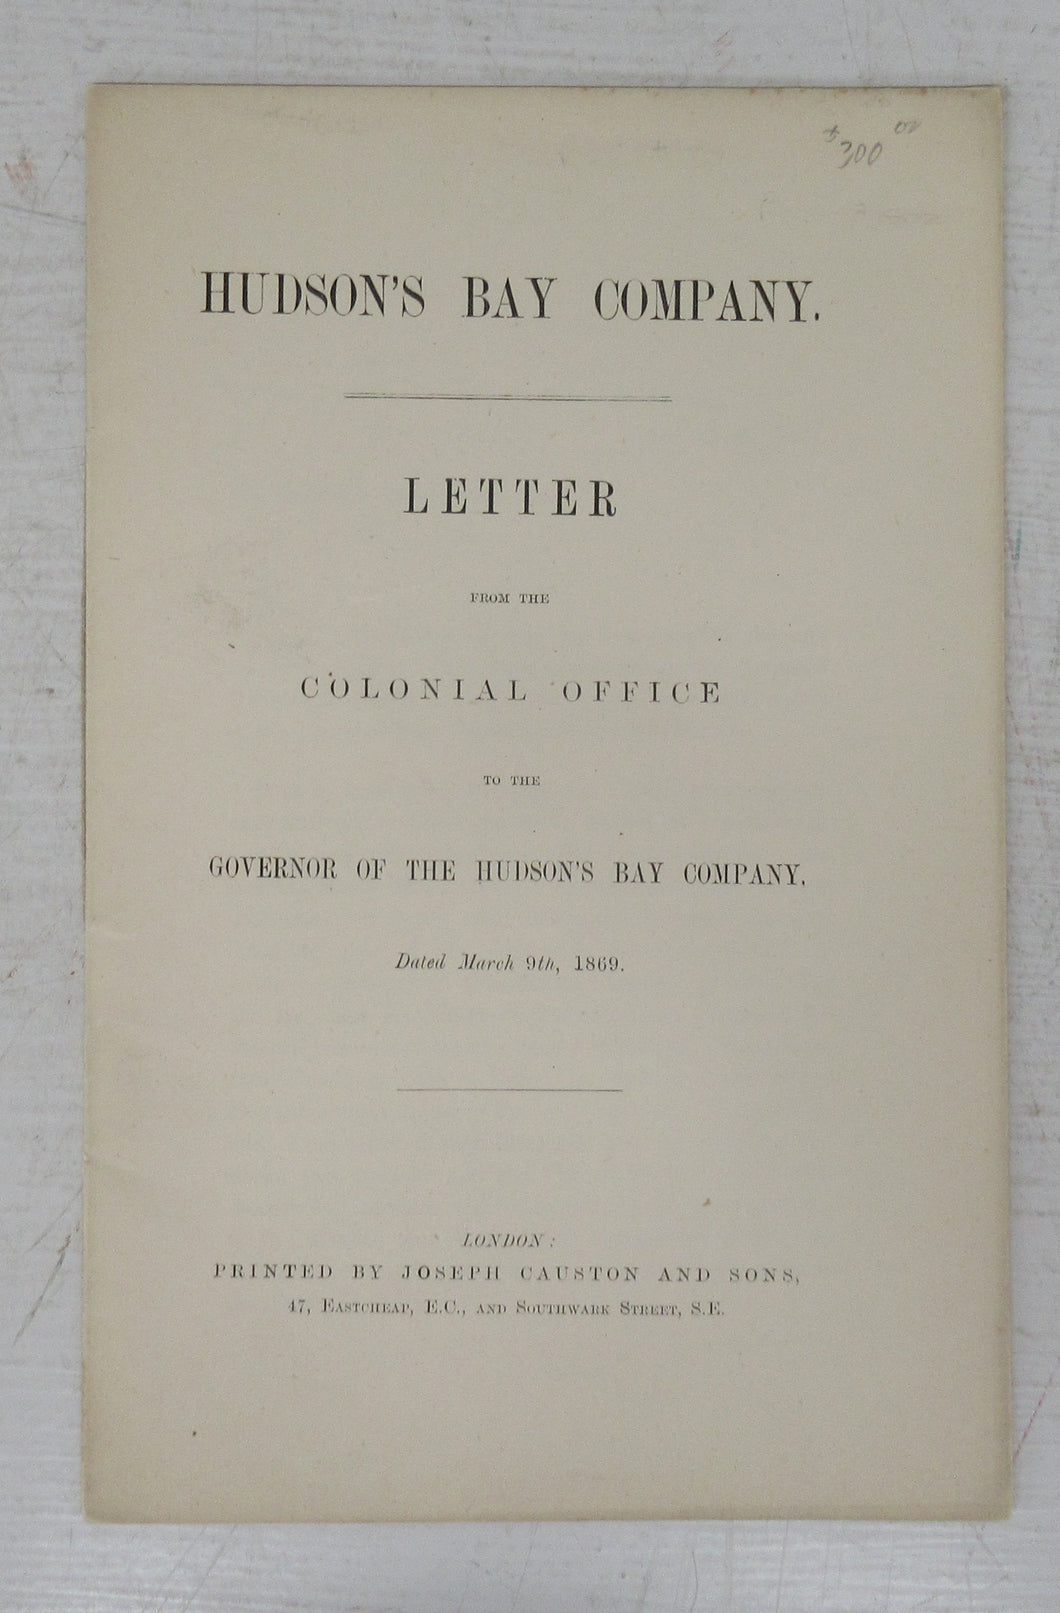 Letter from the Colonial Office to the Governor of the Hudson's Bay Company. Dated March 9, 1869